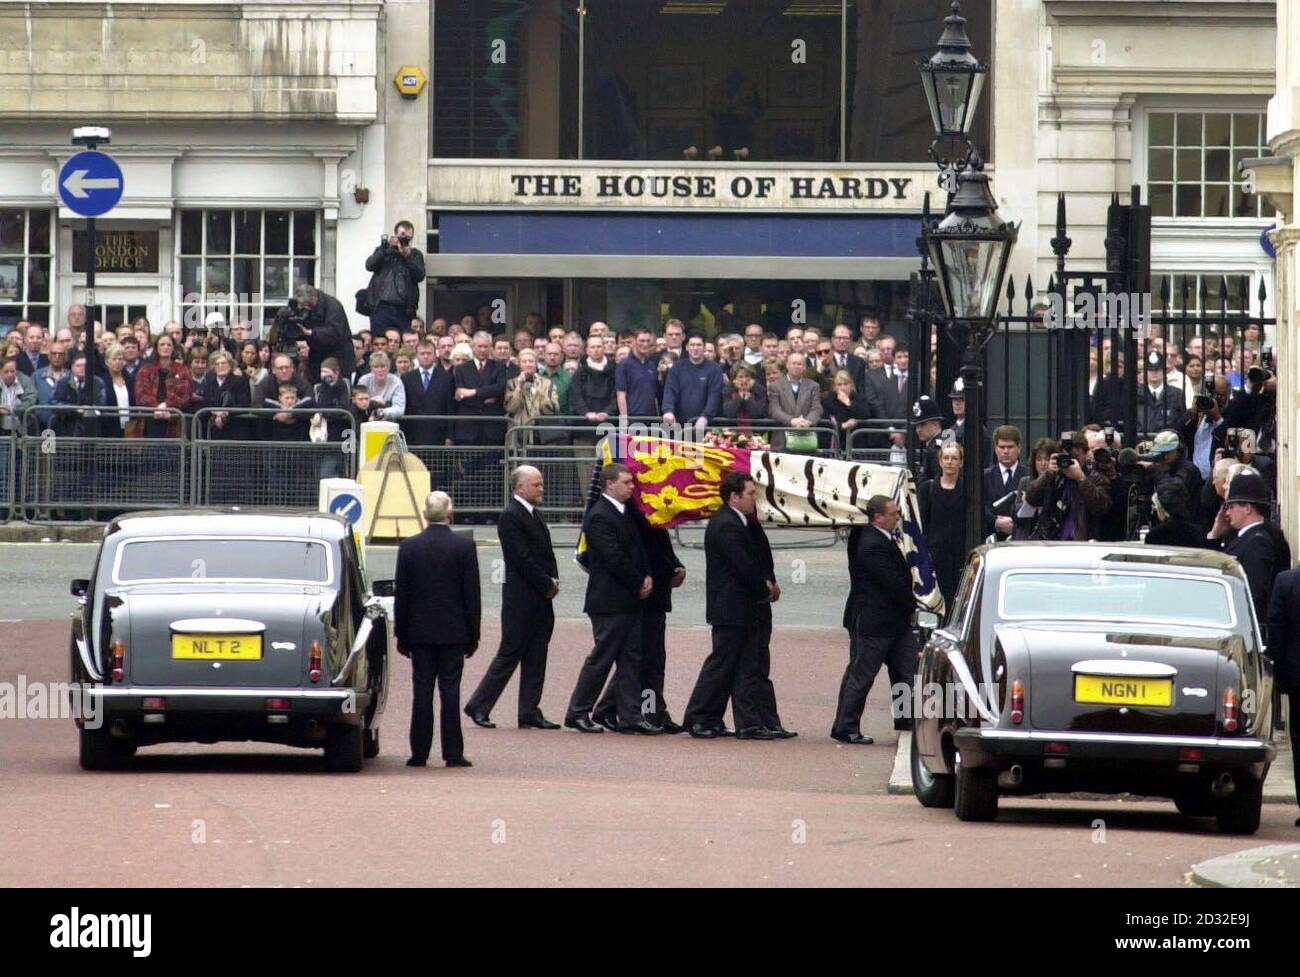 The coffin of Queen Elizabeth, the Queen Mother, who died on Saturday aged 101, is carried into the Queen's Chapel at St James' Palace in central London after being driven from  from the Royal Chapel of All Saints in Windsor Great Park.   *...On Friday 5th April, Queen Elizabeth's coffin will be carried in a ceremonial procession to Westminster Hall,where it will Lie-in-State from Friday afternoon until the evening of Monday 8th April. Stock Photo